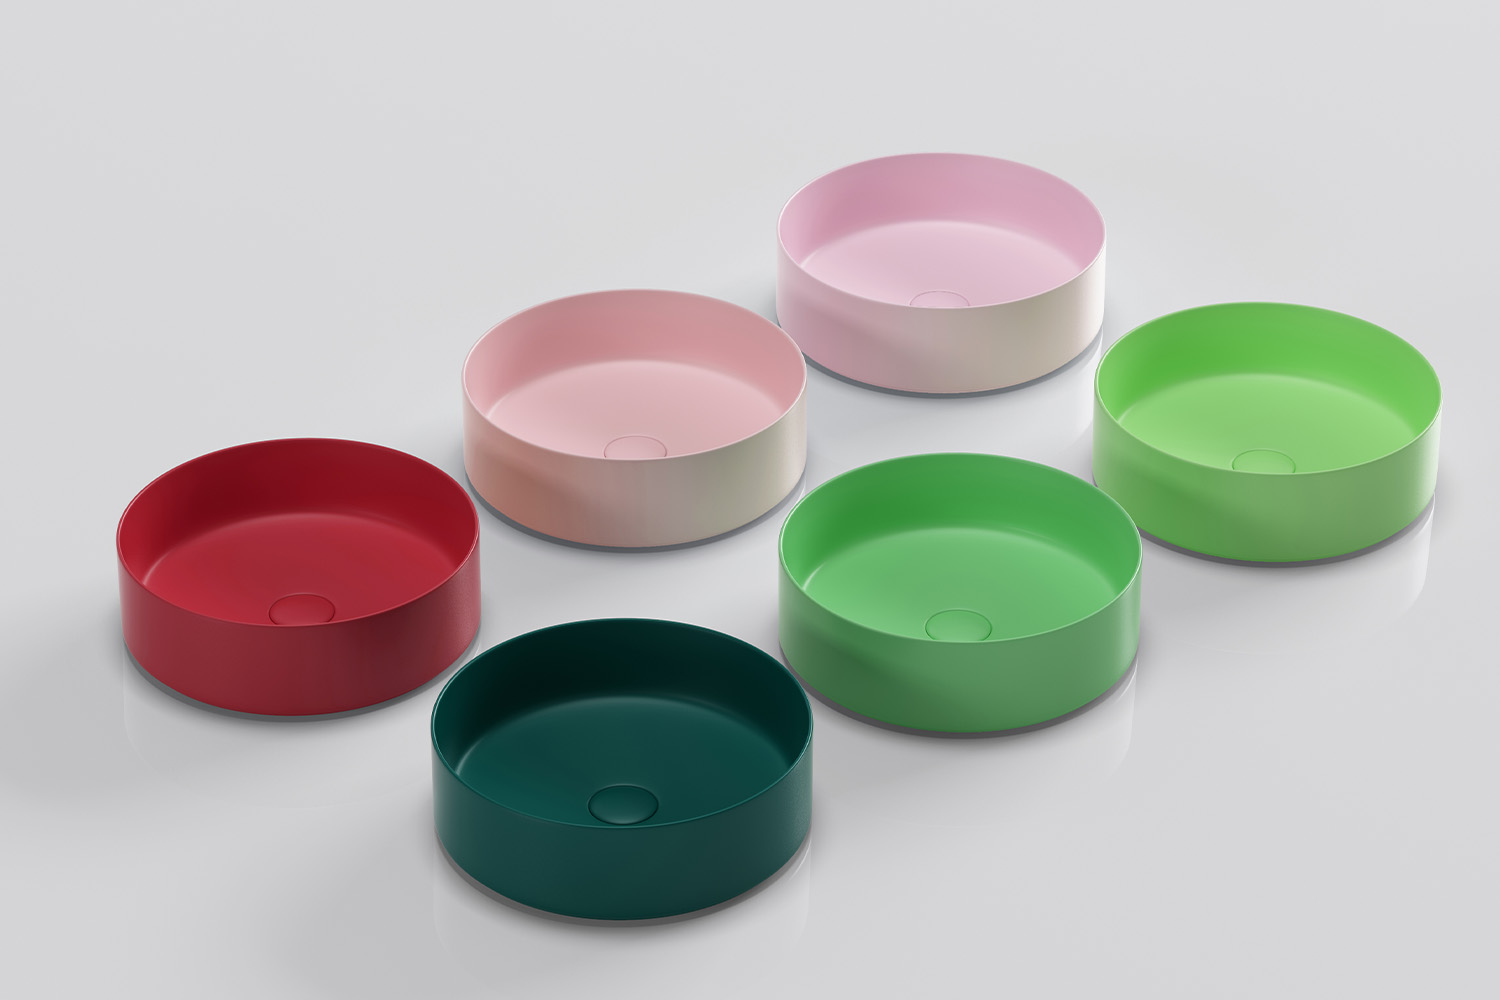 different matte colors are available for 36cm round bathroom wash basin, such as matte light pink, matte dark green, matte red...